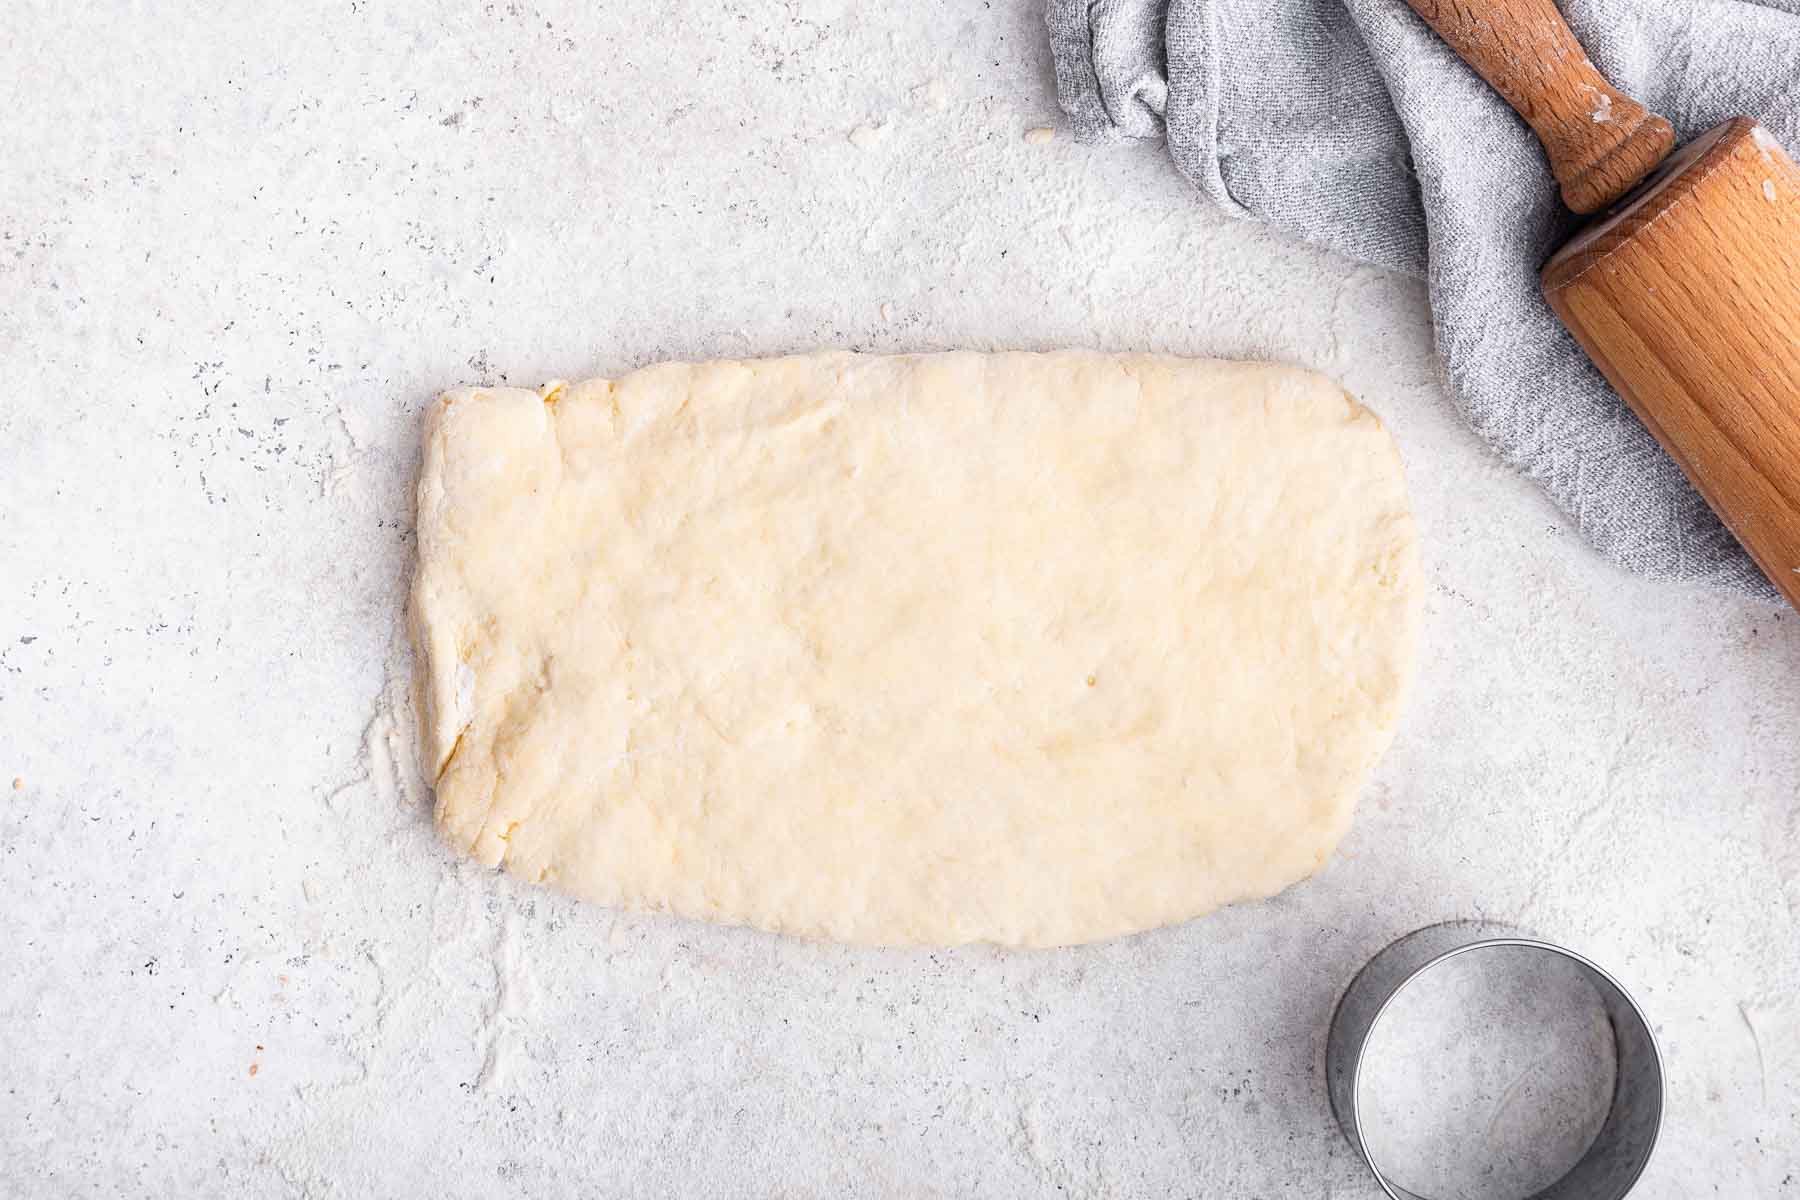 Dough pressed into 1-inch thick rectangle before being cut.